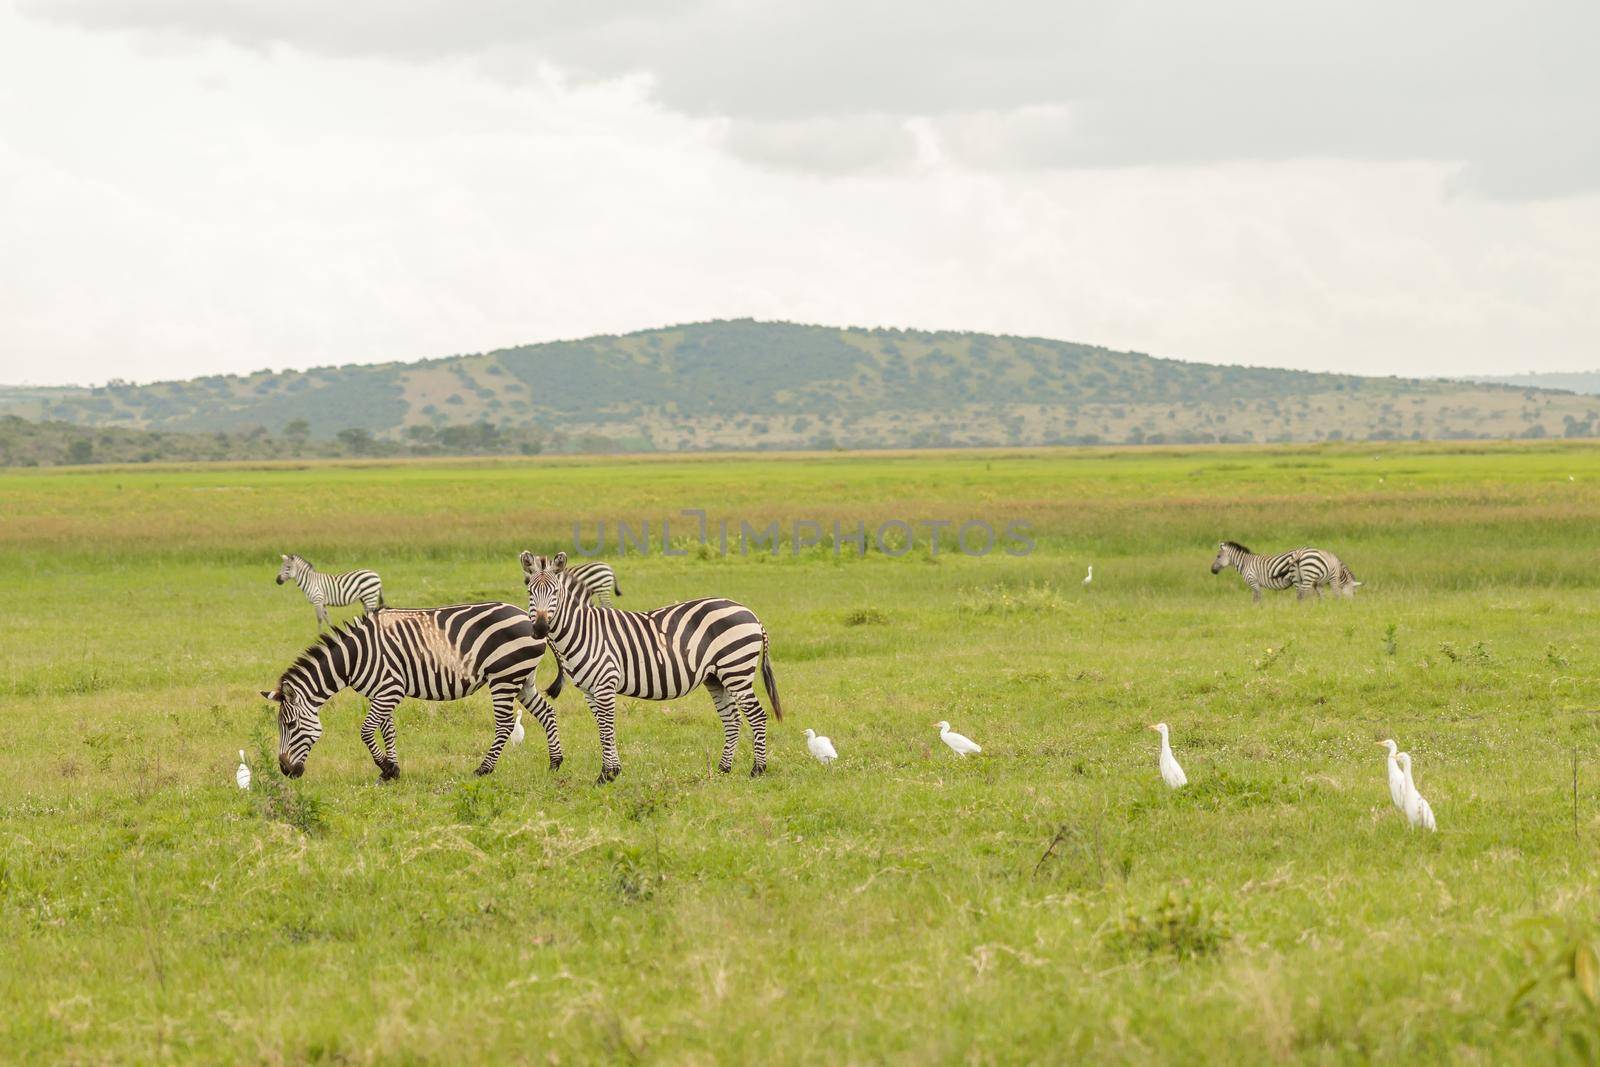 Herd of zebras grazing in a meadow with birds nearby in a national park in Africa